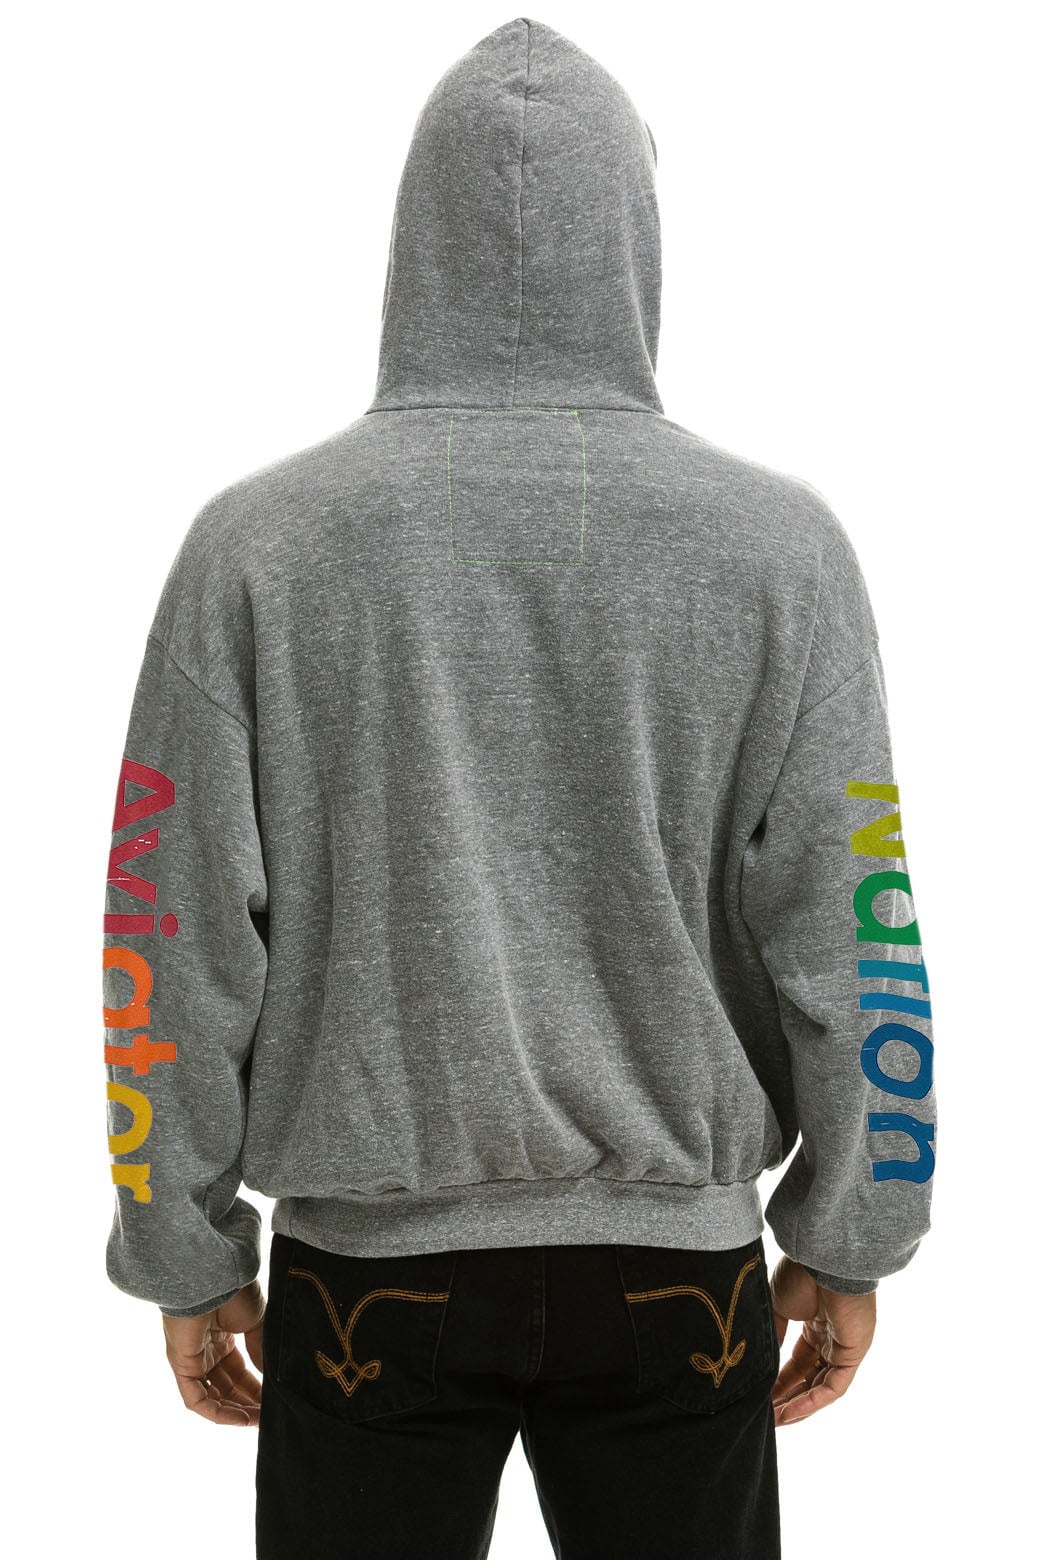 AVIATOR NATION NEW YORK CITY RELAXED PULLOVER HOODIE - HEATHER GREY Hoodie Aviator Nation 